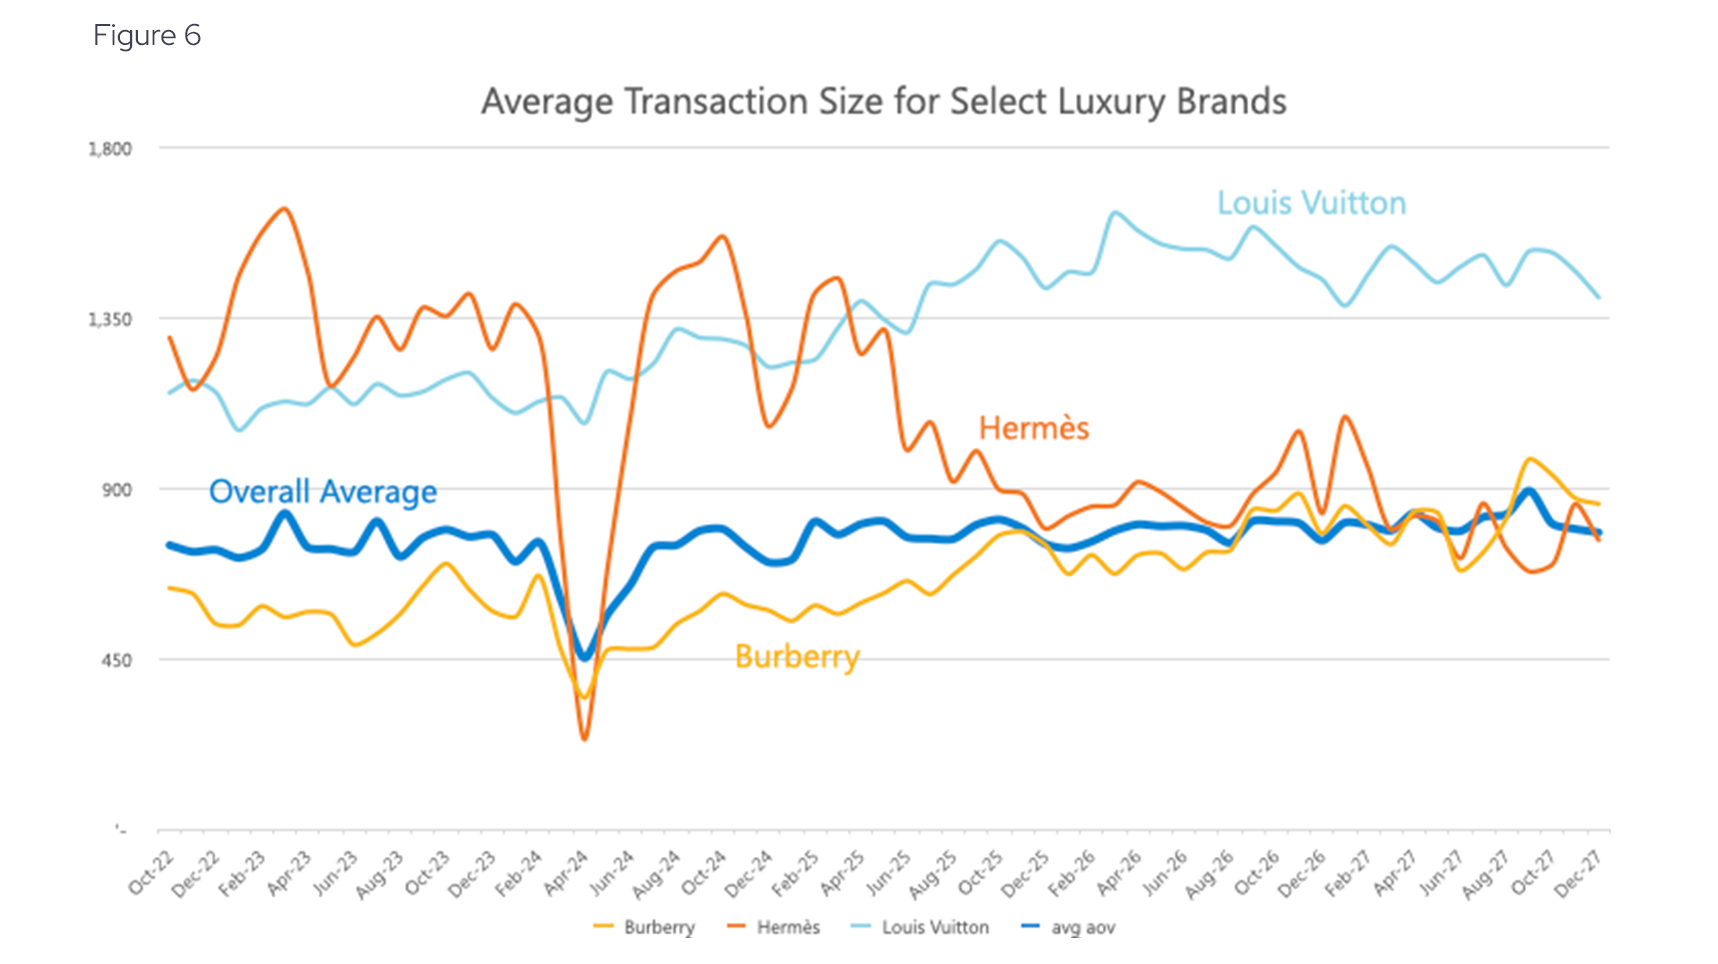 Average Transaction Size for Select Luxury Brands